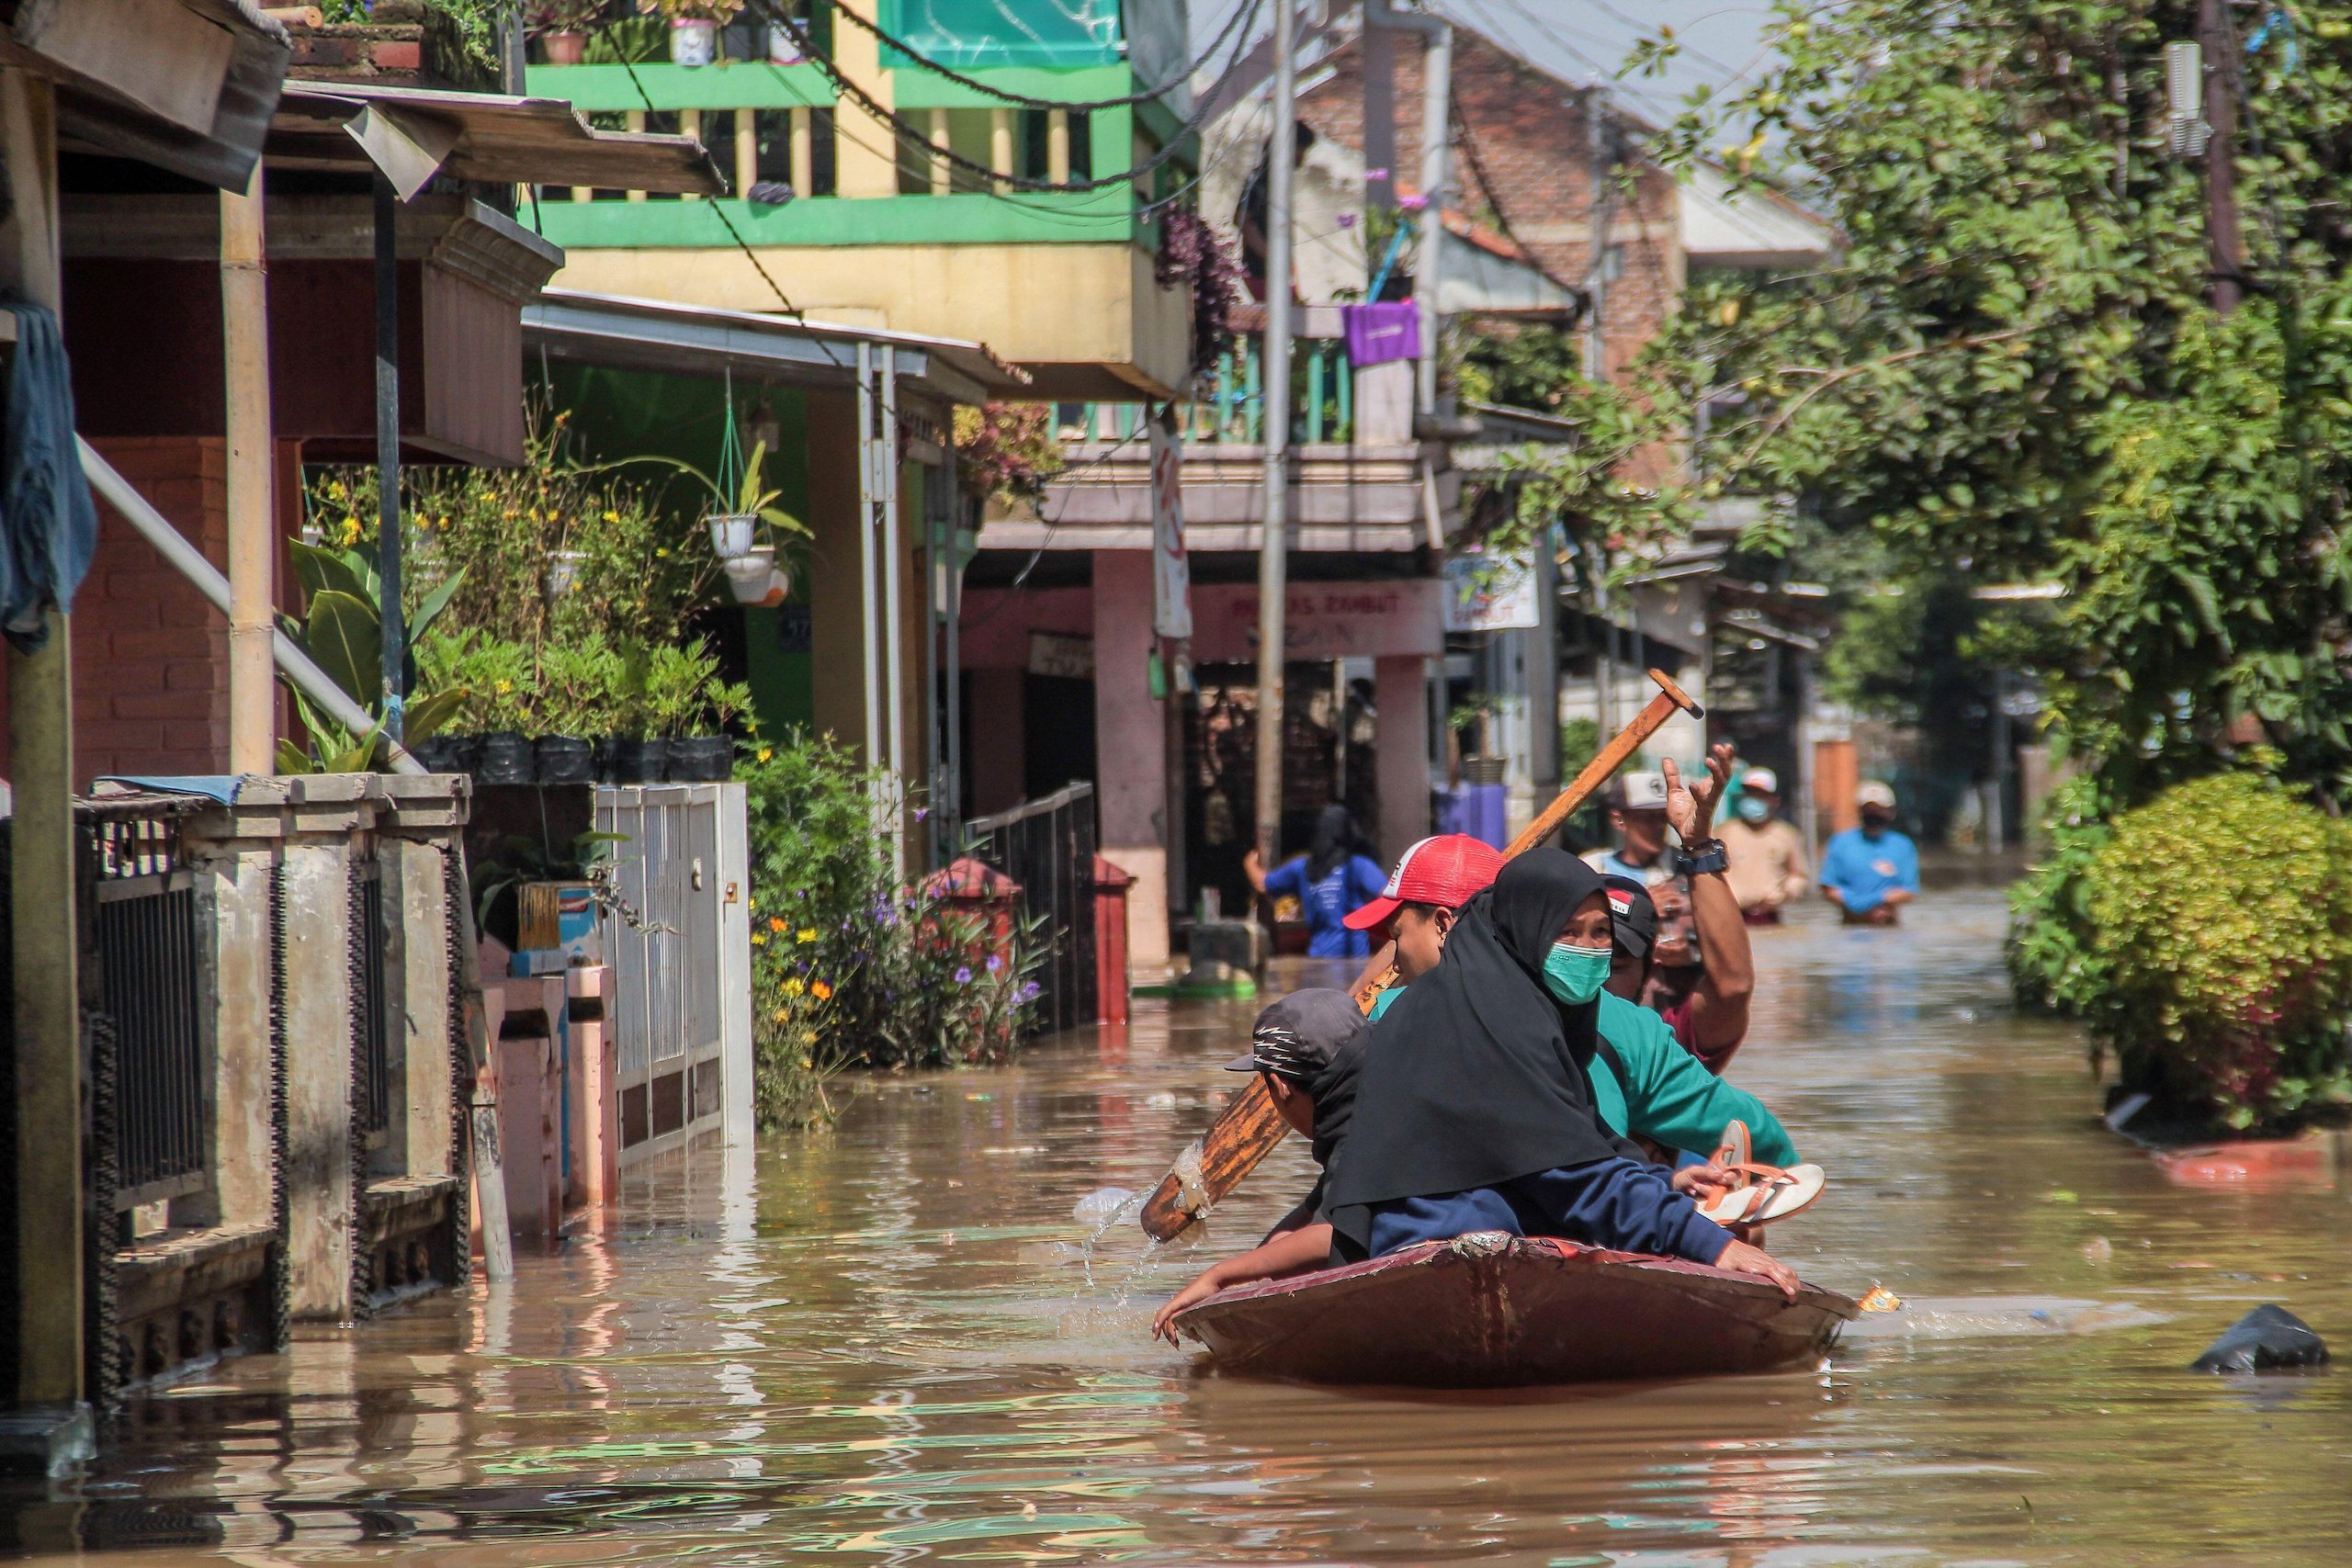 <p>Residents are evacuated after floods in Dayeuhkolot, Indonesia, November 2021. Loss and damage from climate change was a major theme at the UN’s latest climate talks in Bonn. (Image: Alamy)</p>